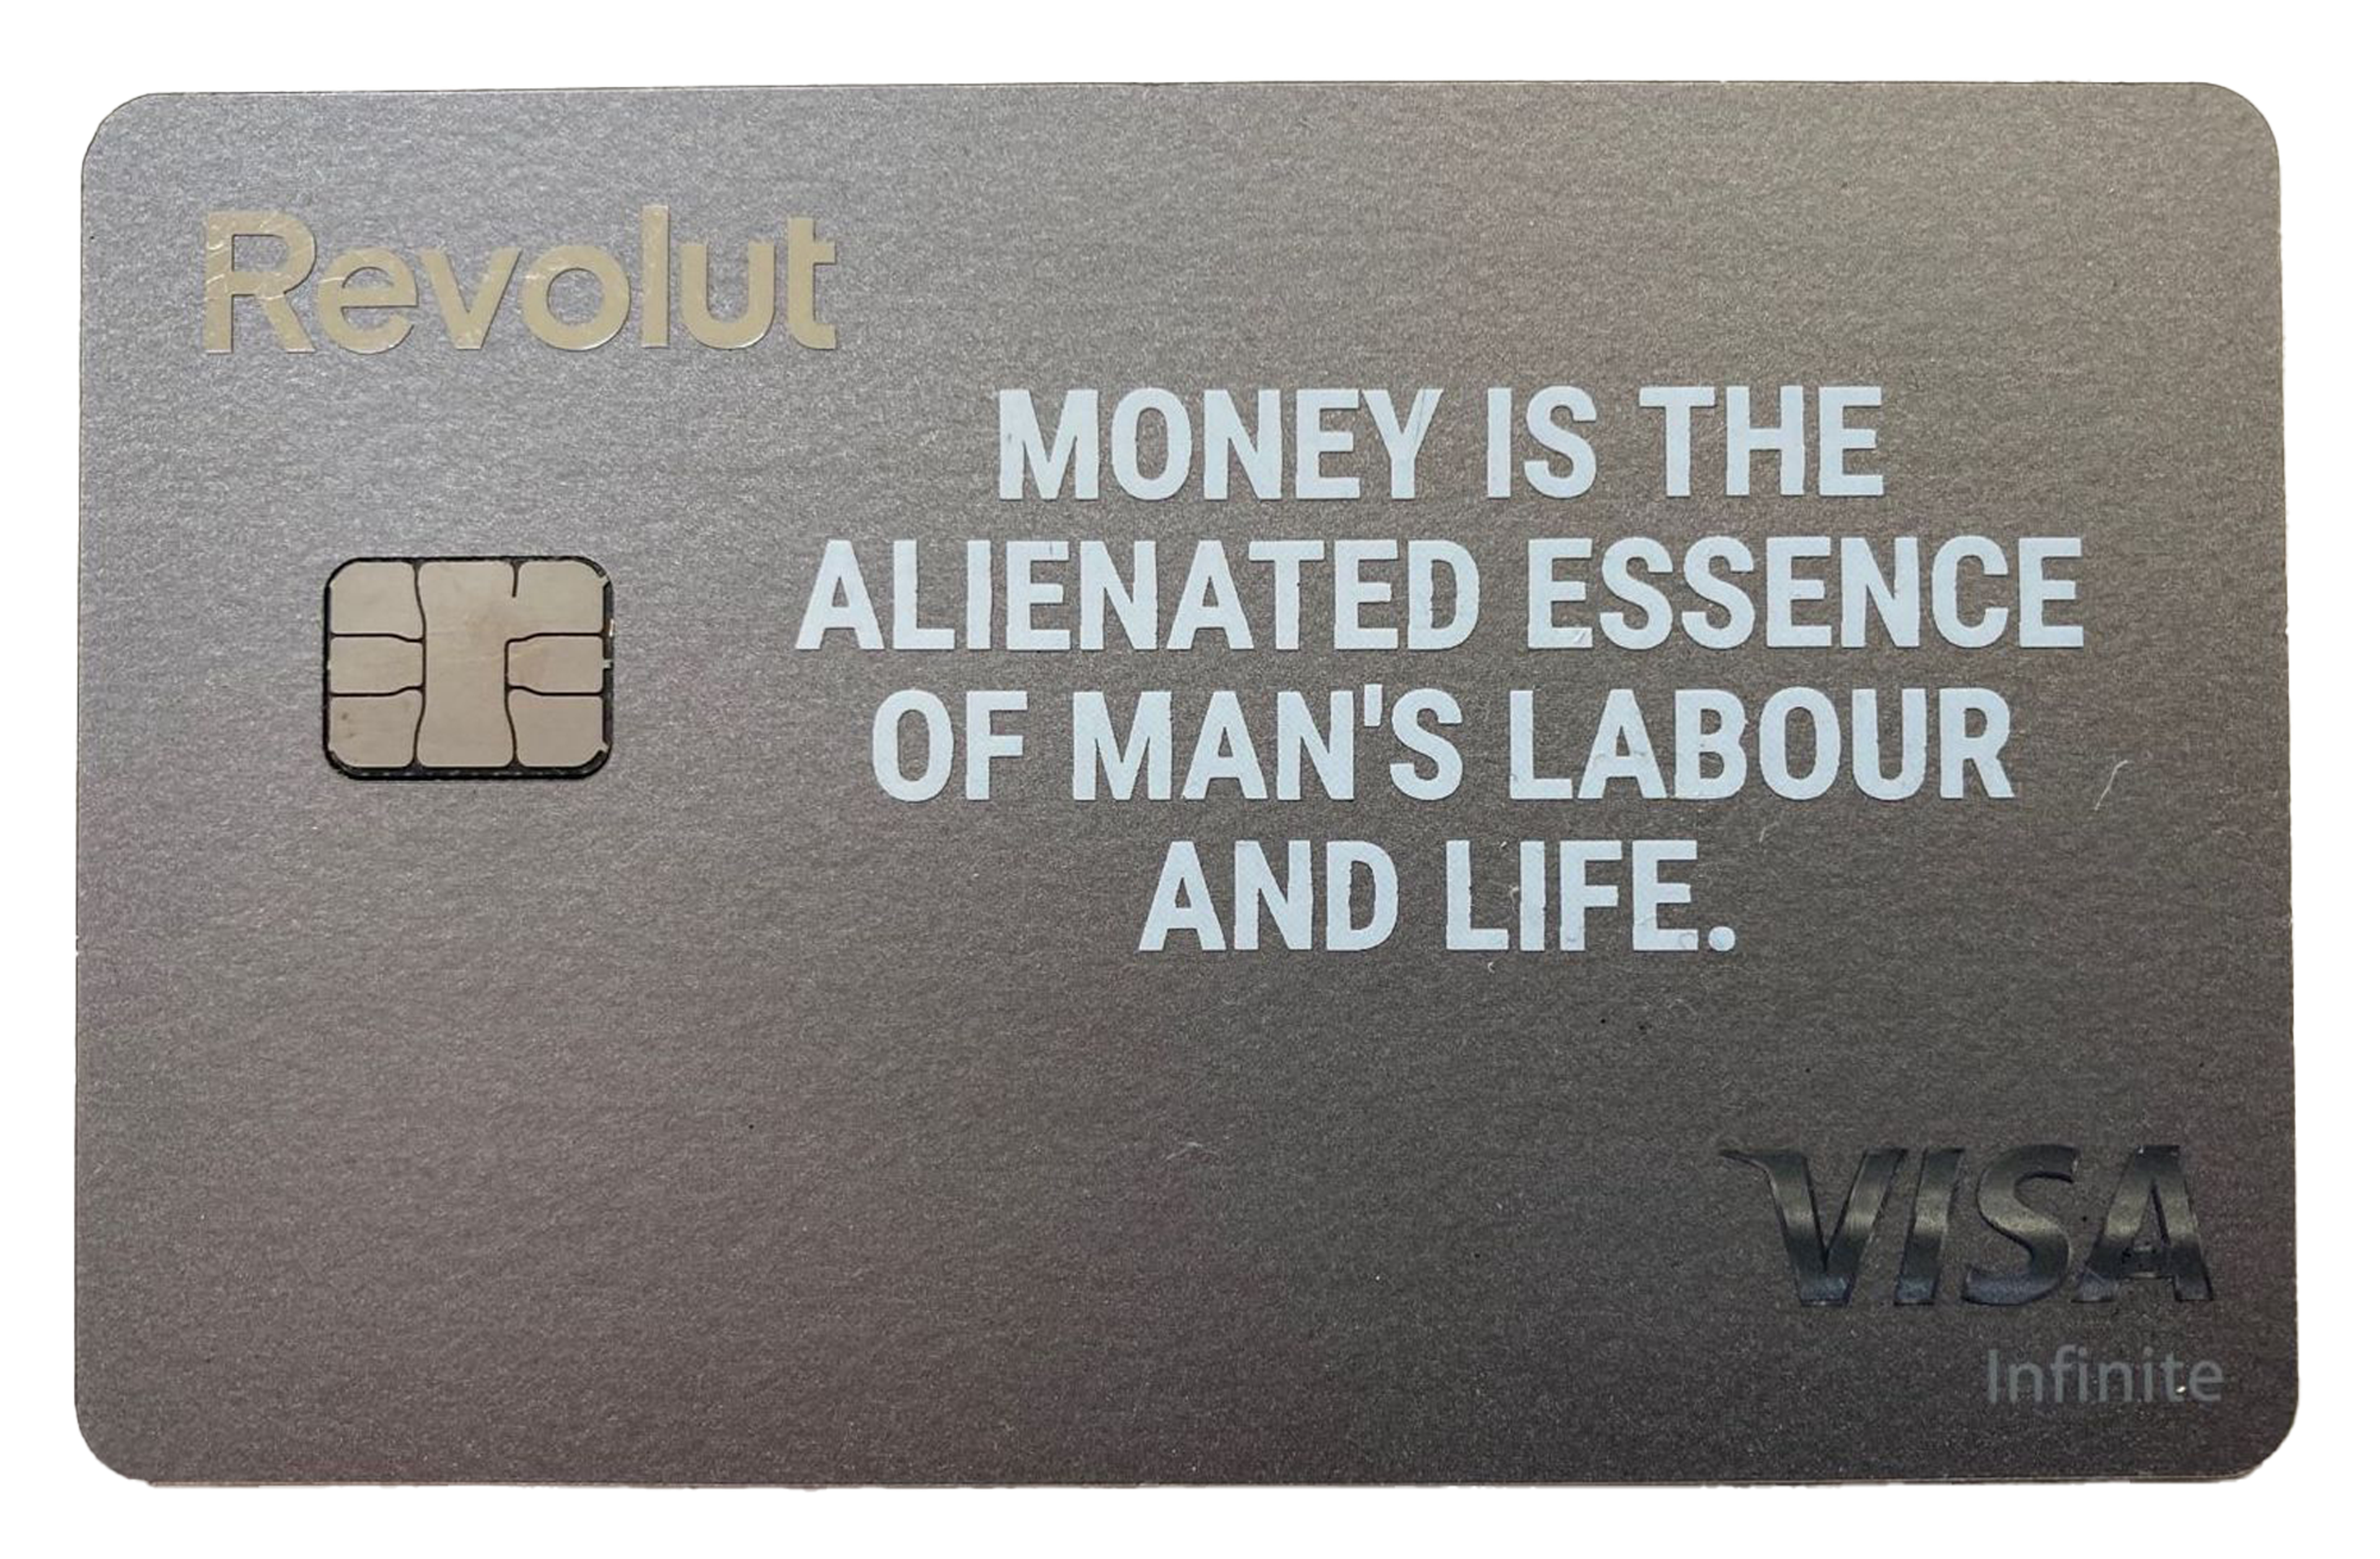 Personalized credit card